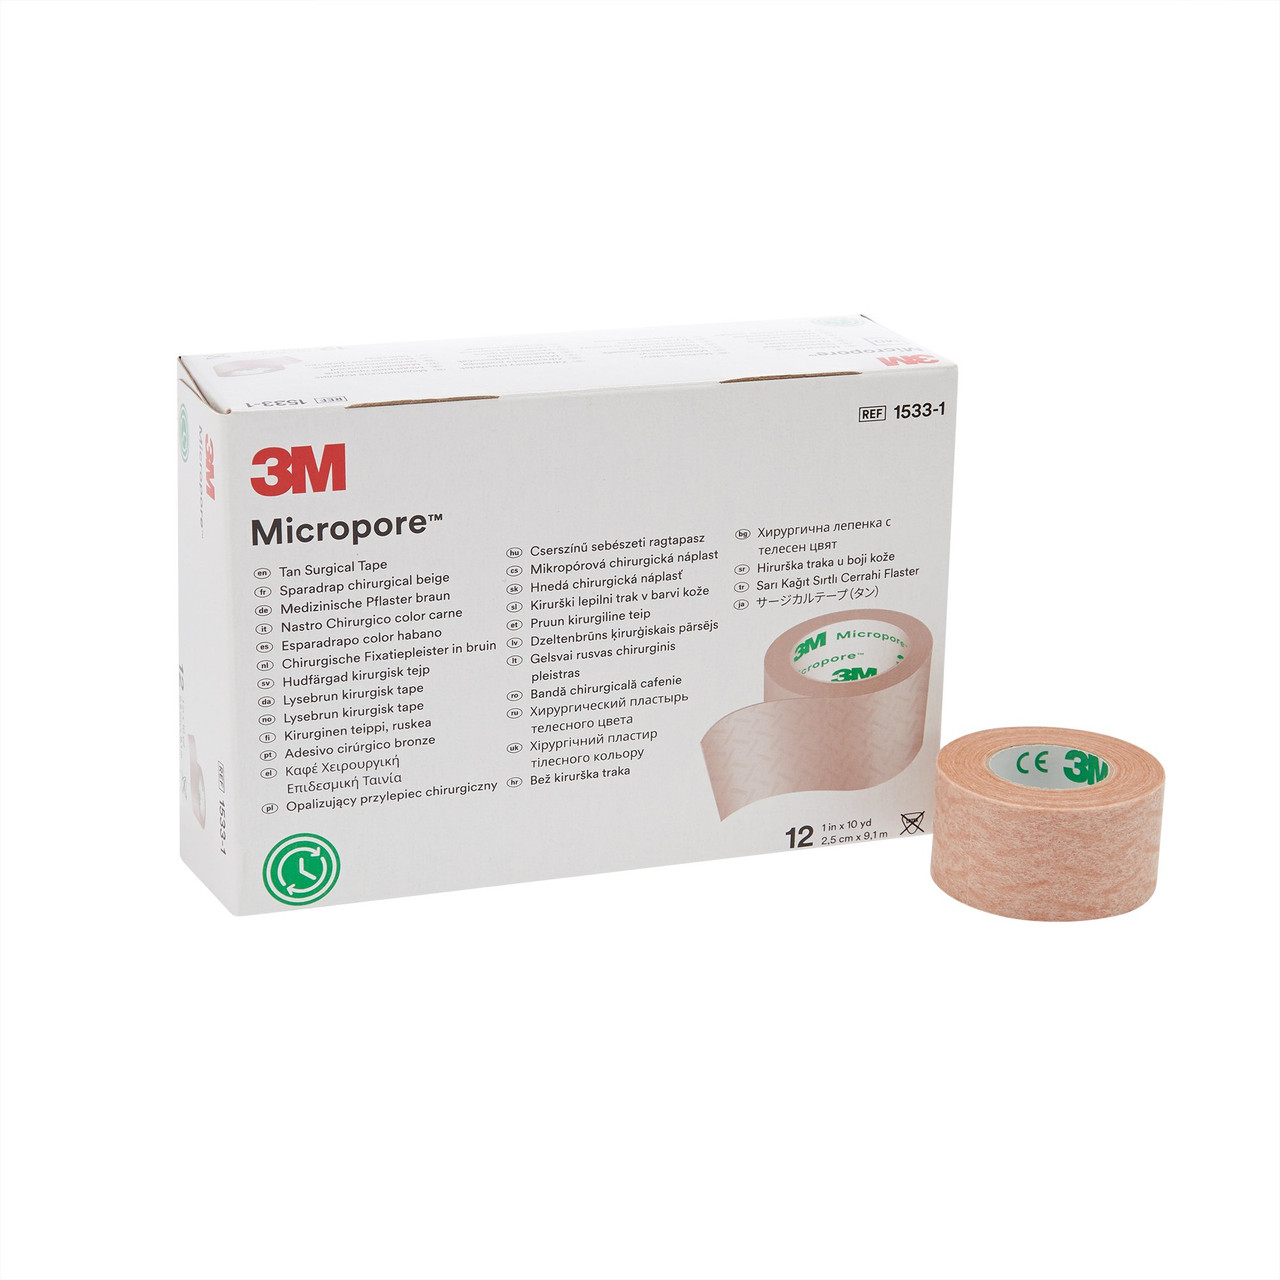 3M Microporea Standard Hypoallergenic Paper Surgical Tape 2 x 10 yds 60 ct